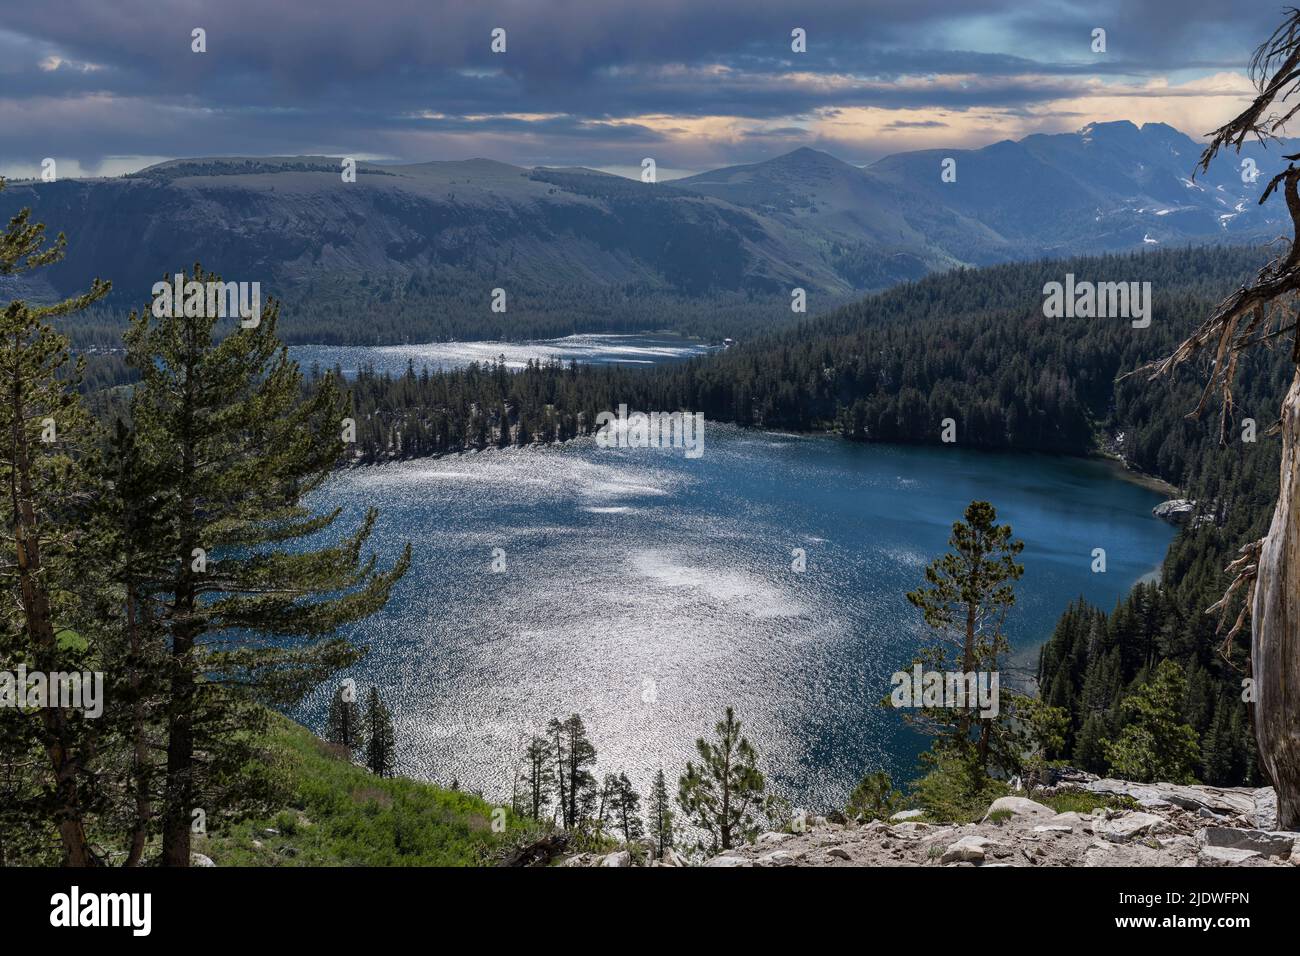 Lake George and Lake Mary at Mammoth Lakes in the California Sierra Nevada Mountains. Stock Photo